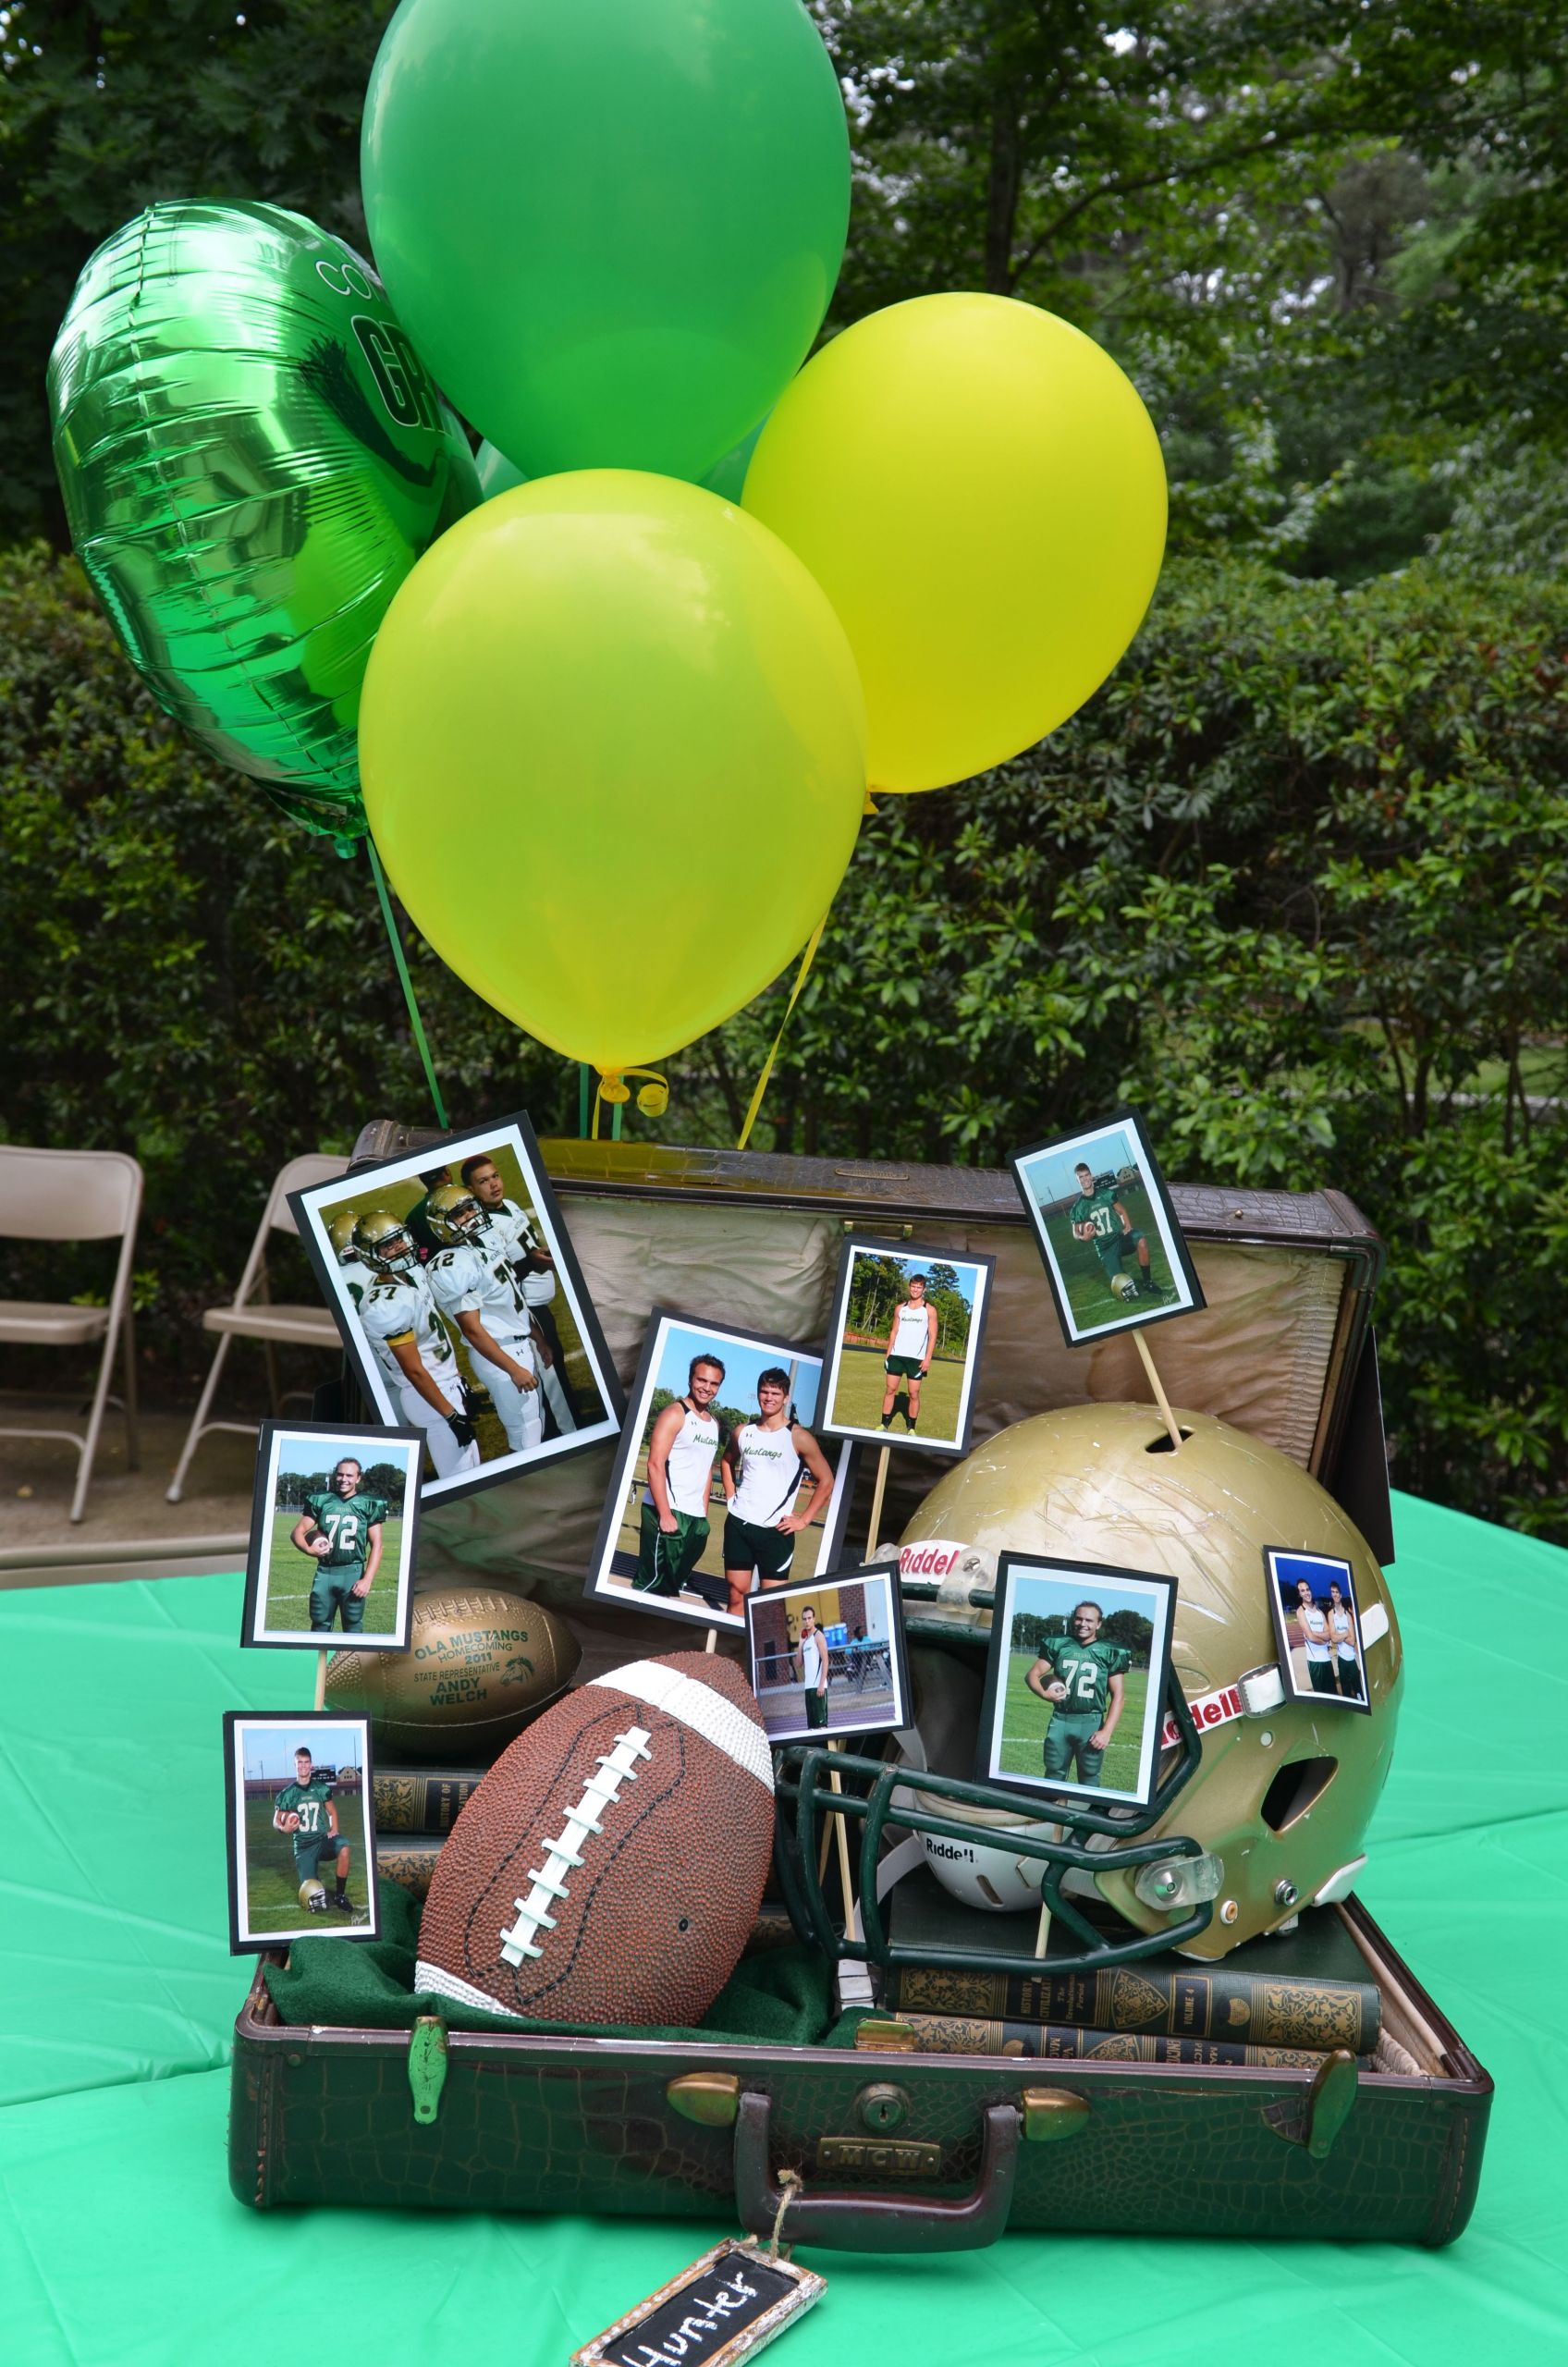 College Graduation Party Ideas For Guys
 Centerpiece for Boys could easily change this up for